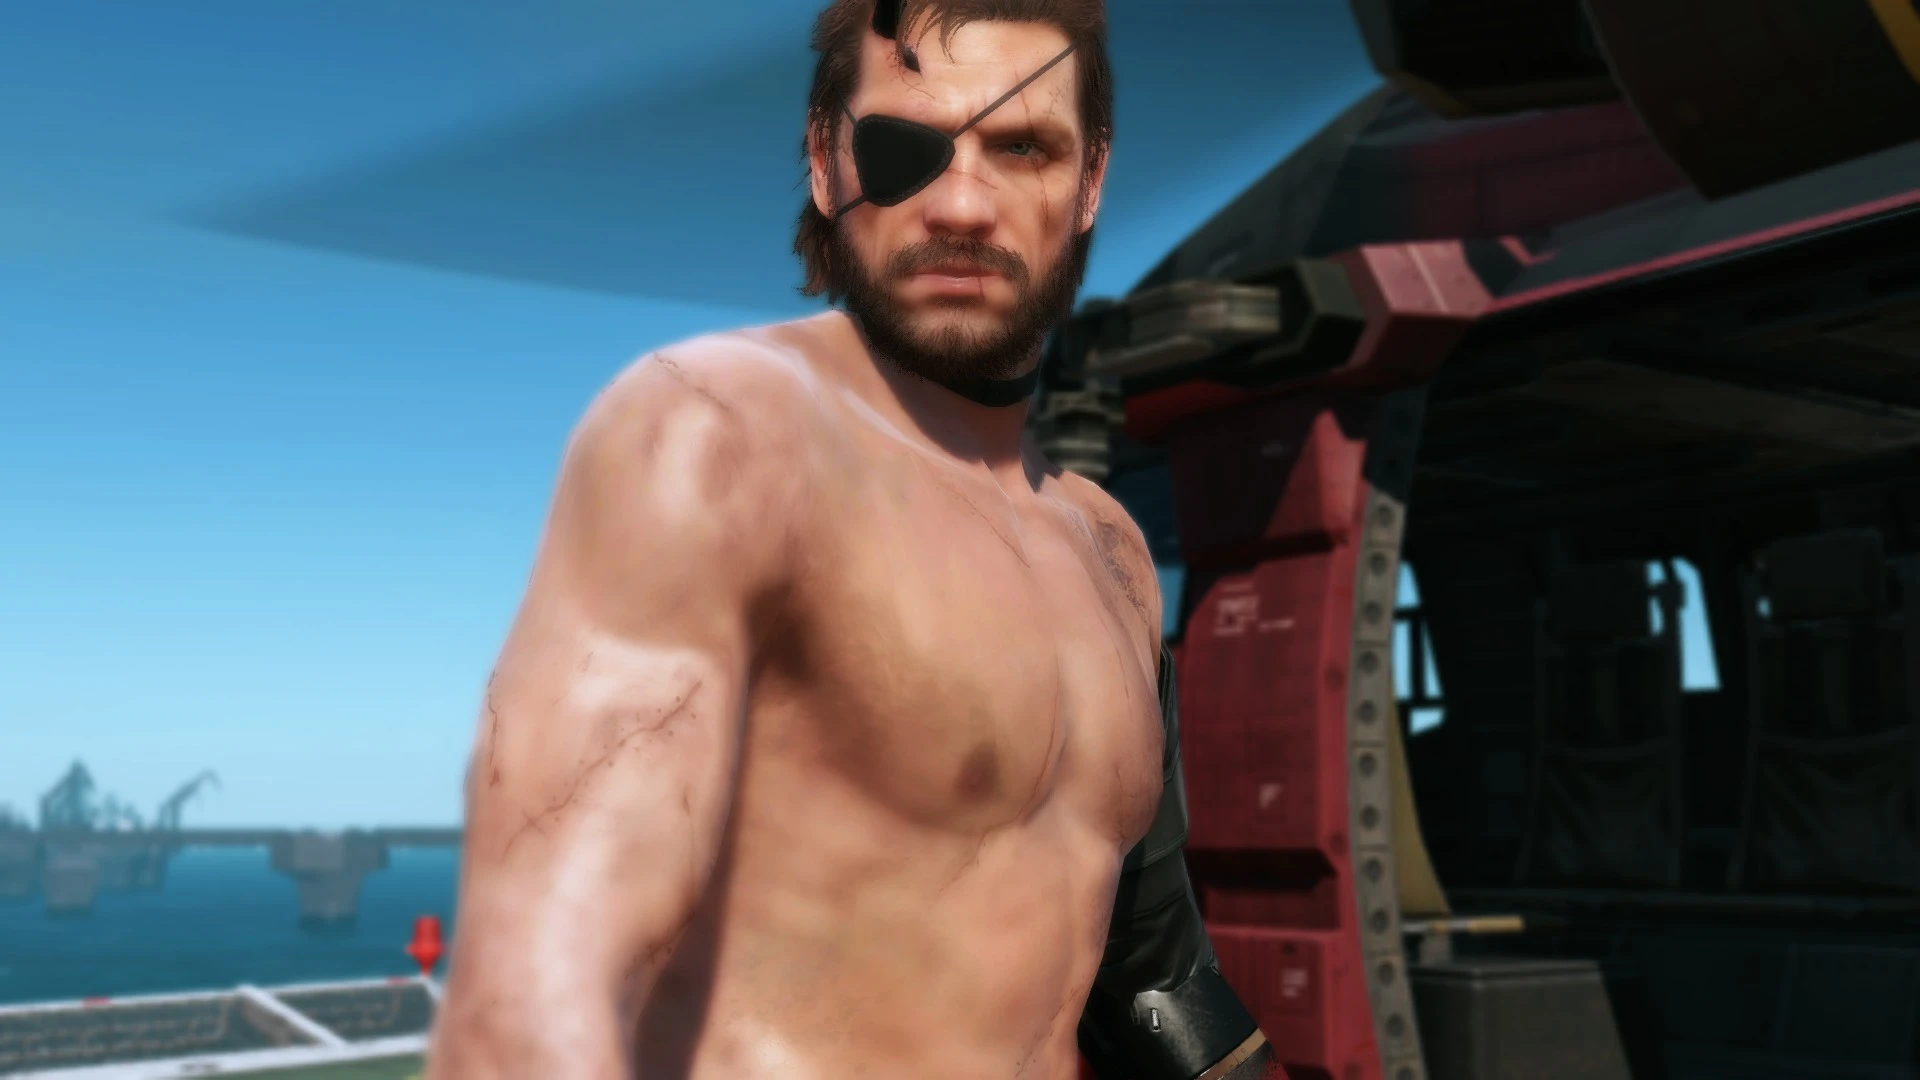 Bare Chested Naked Camo at Metal Gear Solid V: The Phantom 